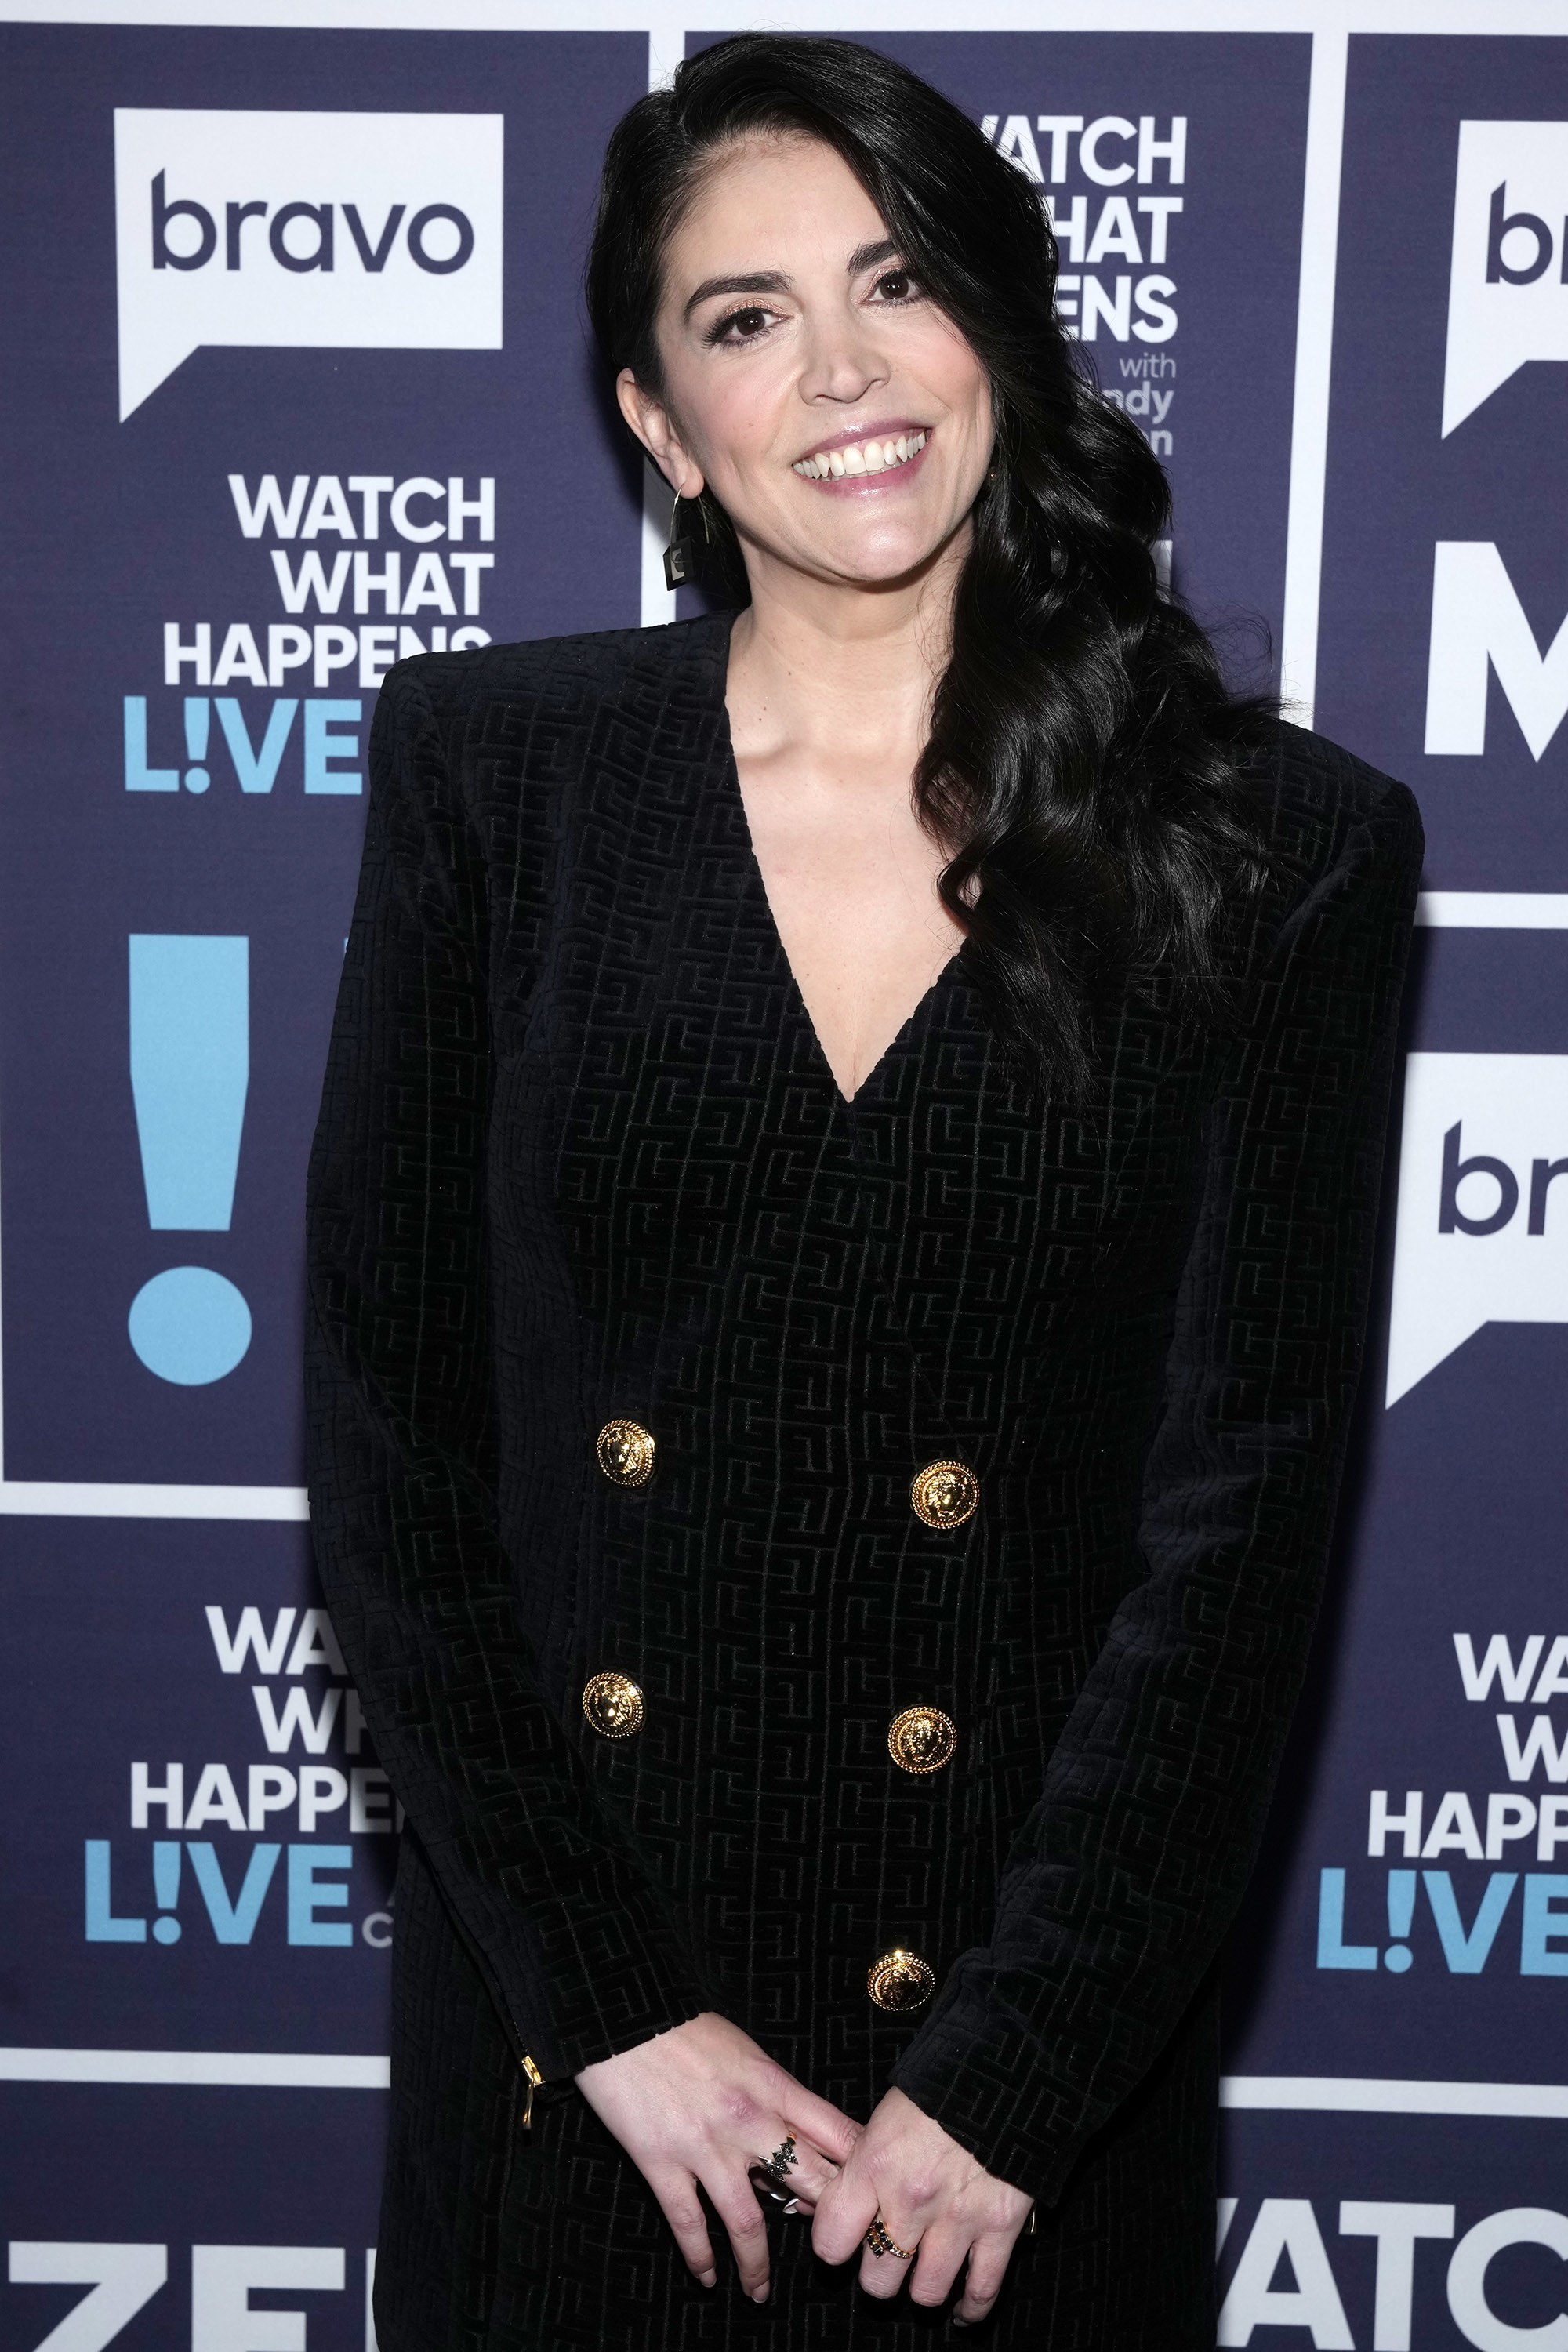 Smiling Cecily in black double-breasted blazer dress with gold buttons at a media event